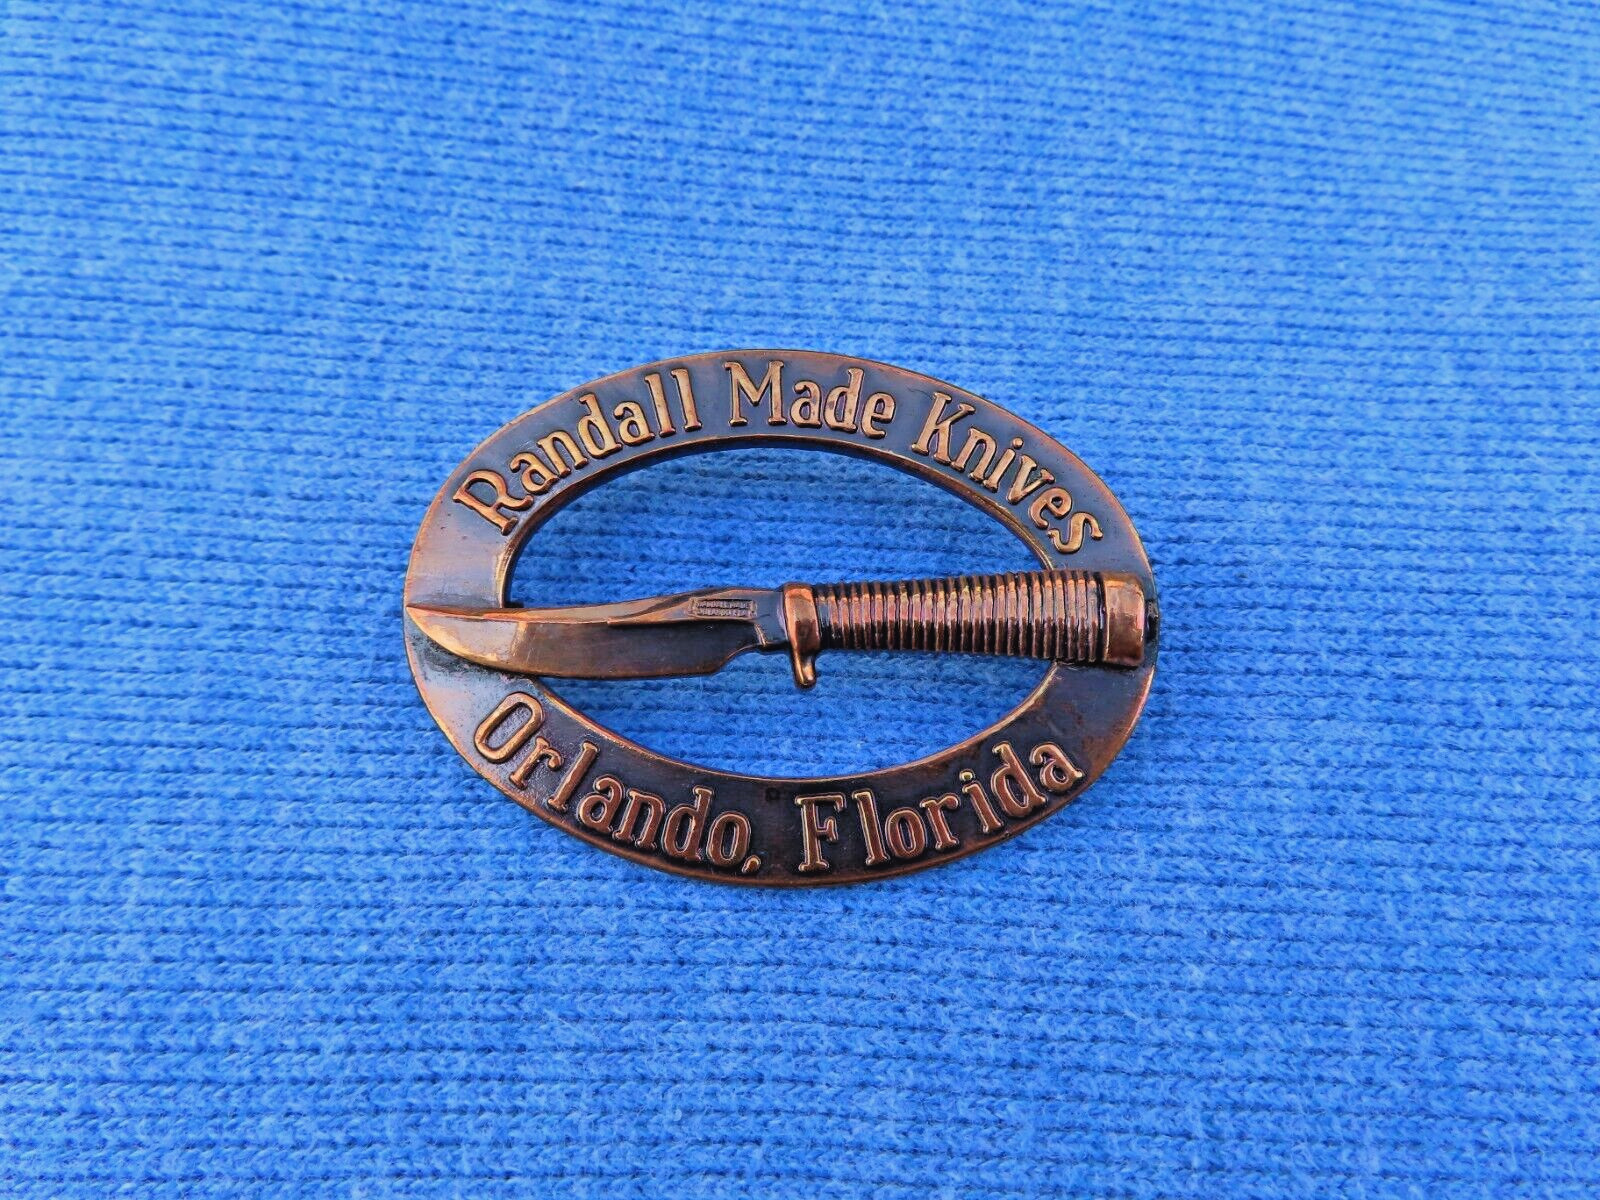 Randall Made Knives - Vintage & Original Metal Hat Lapel Pin - Great Condition